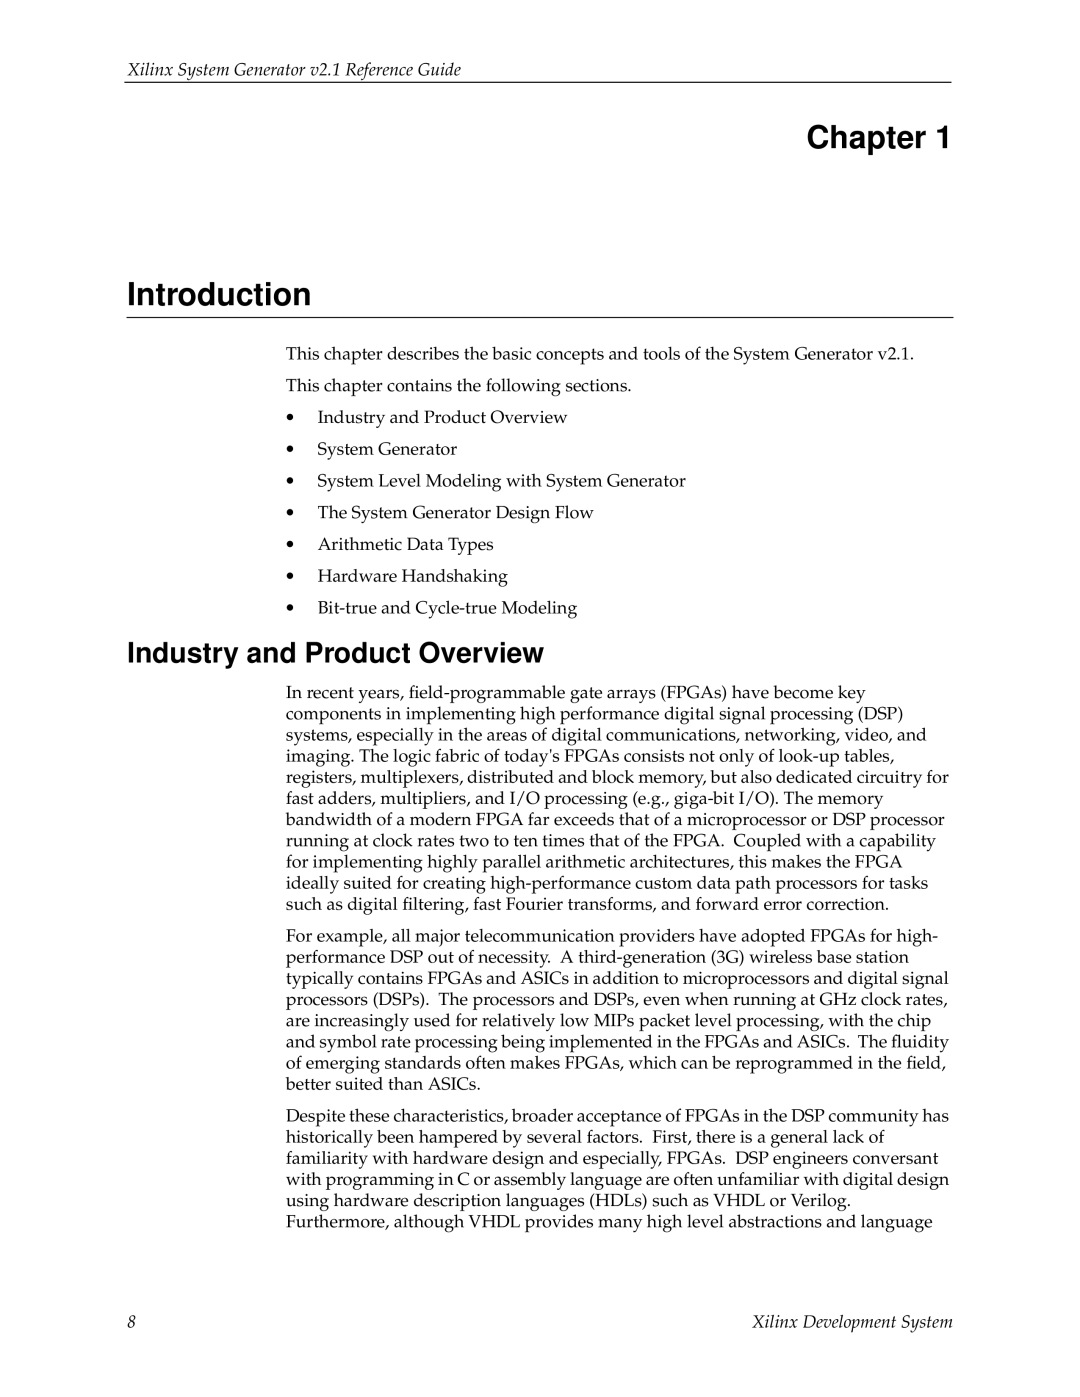 Xilinx V2.1 manual Chapter Introduction, Industry and Product Overview, Xilinx System Generator v2.1 Reference Guide 